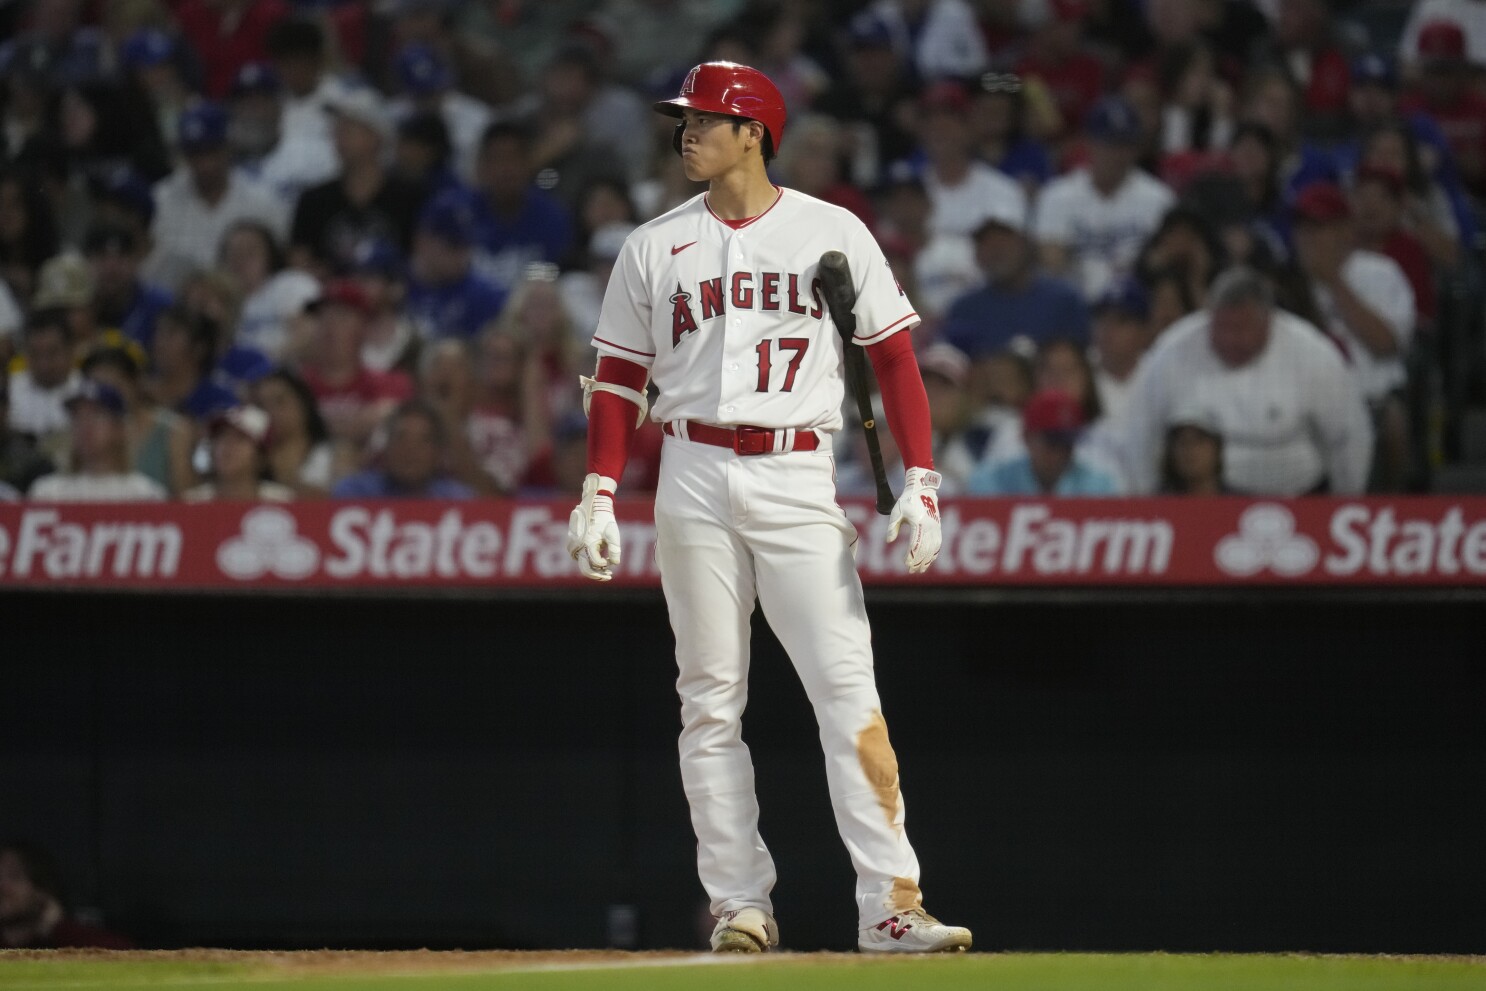 Shohei Ohtani and Ronald Acuña Jr elected to start in MLB All-Star Game